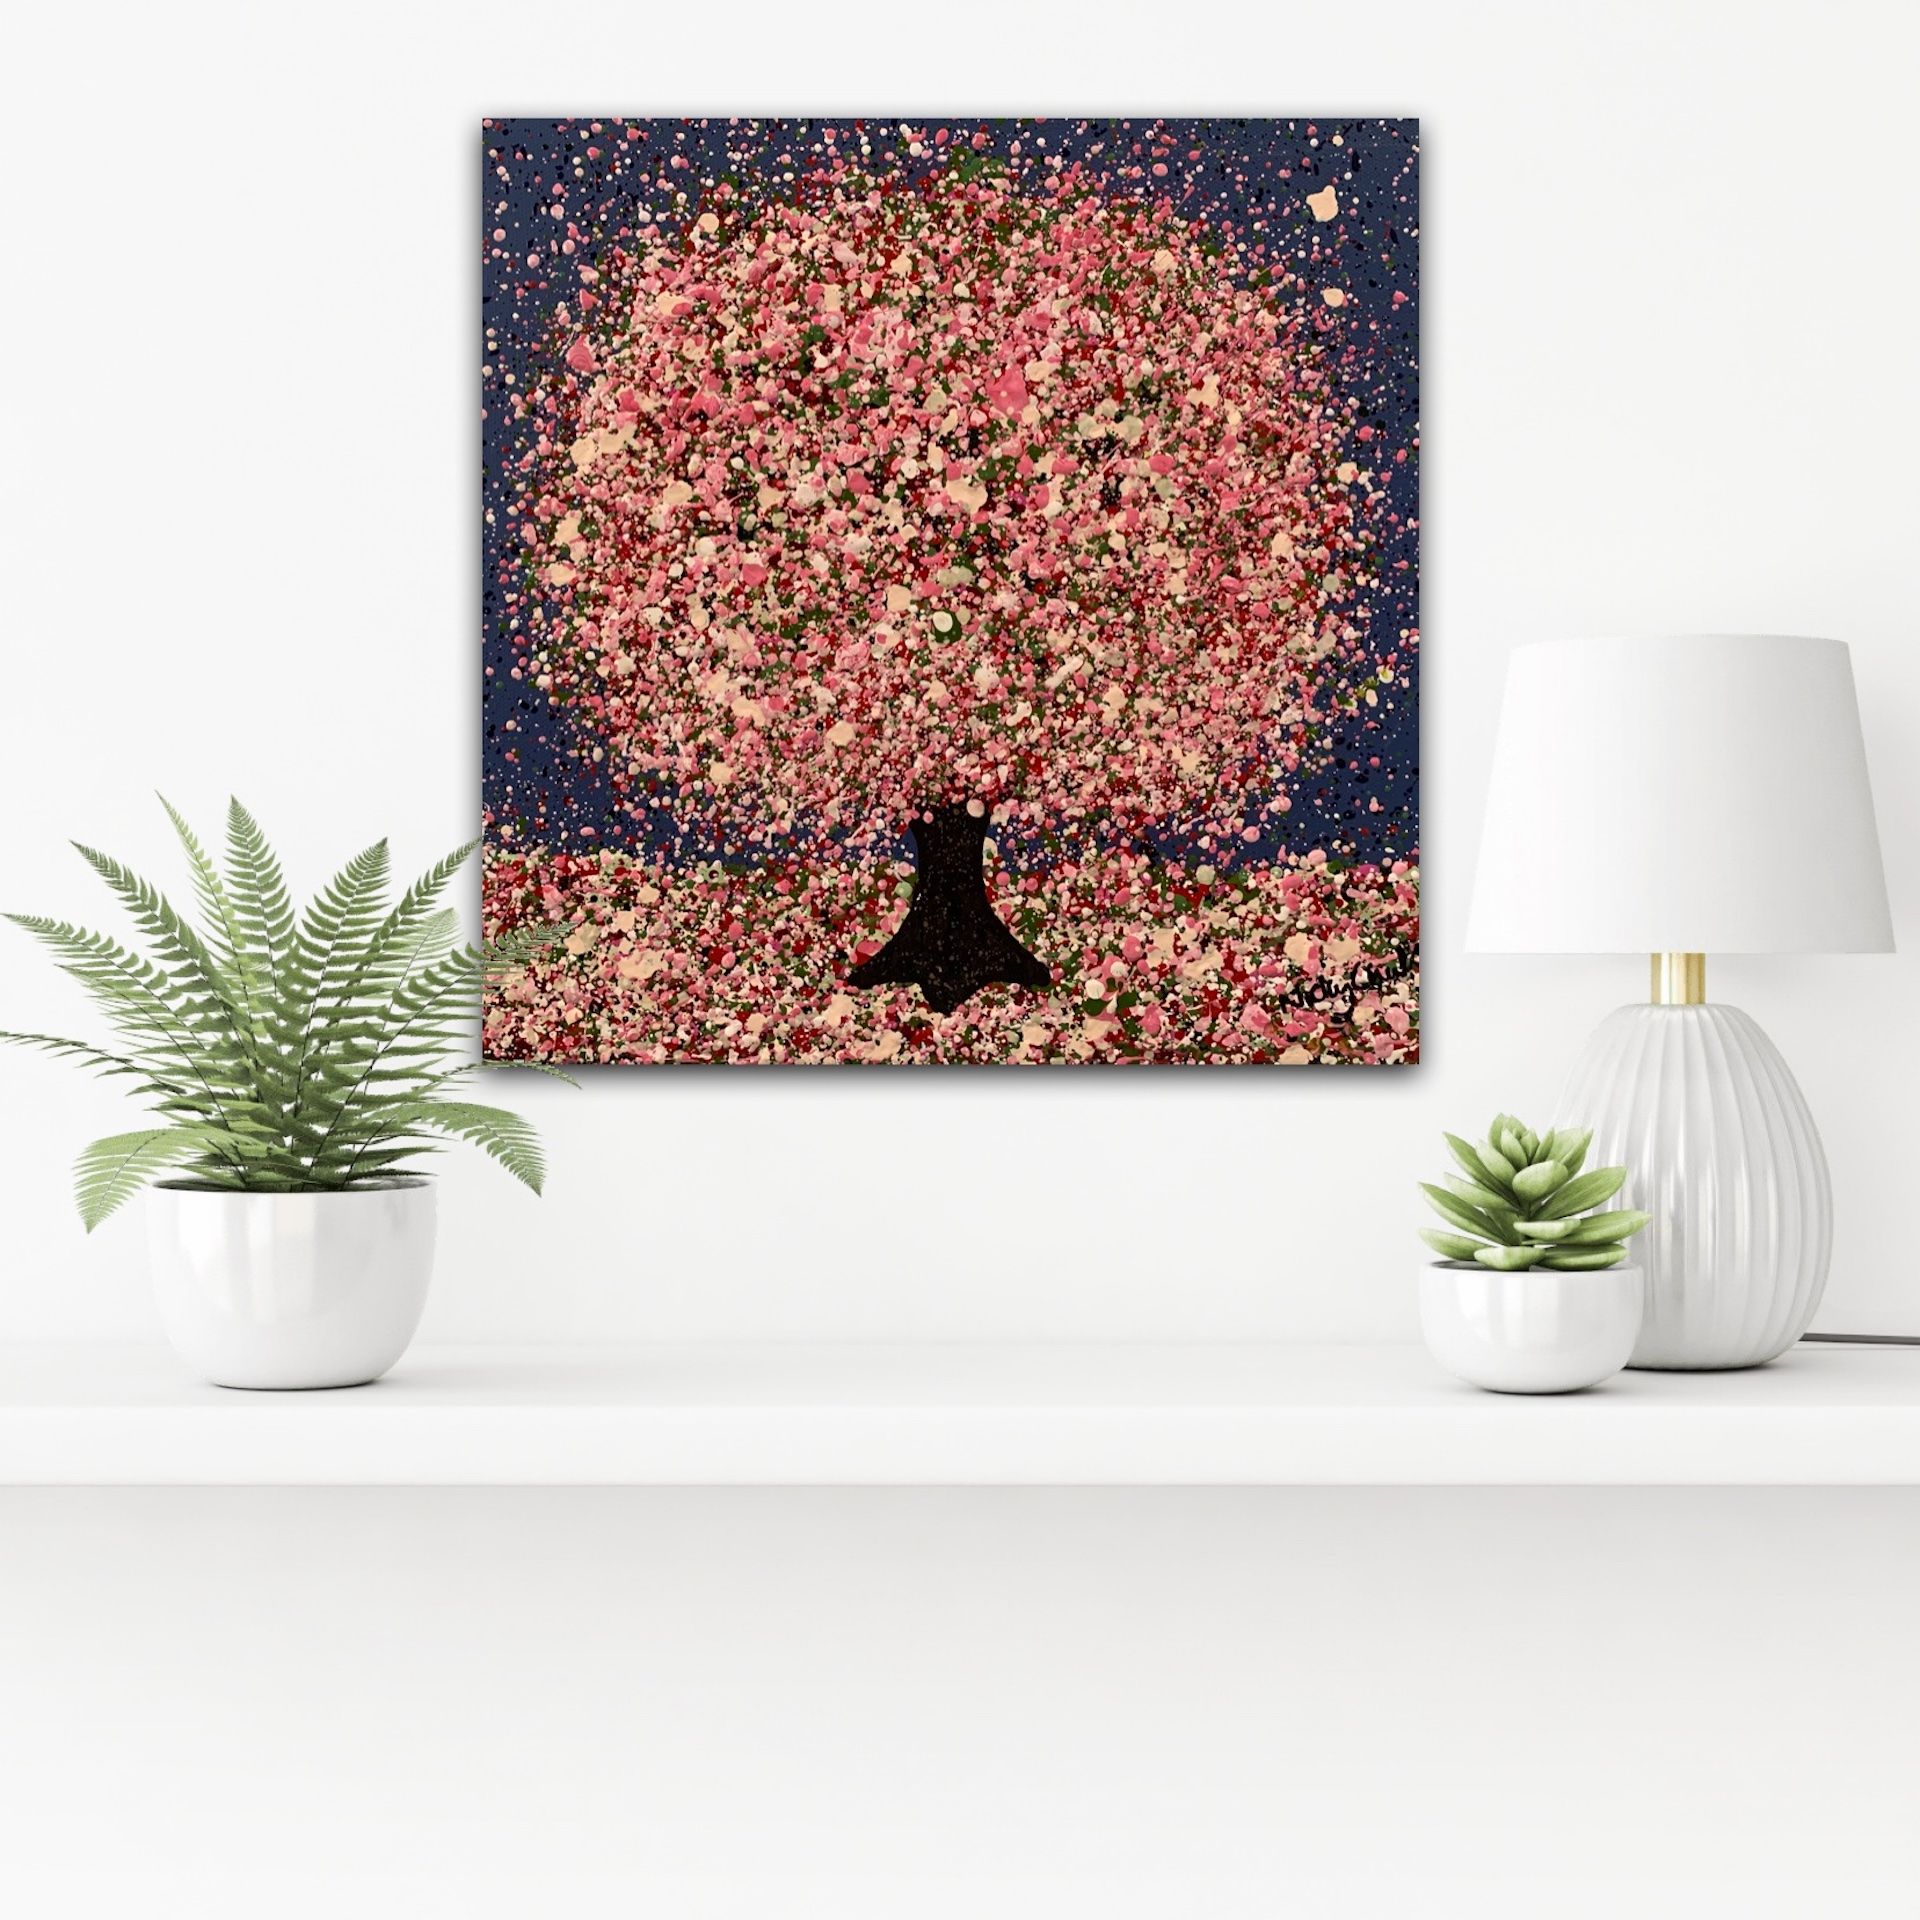 A Little Cherry Blossom And Moonlight by Nicky Chubb - Secondary Image